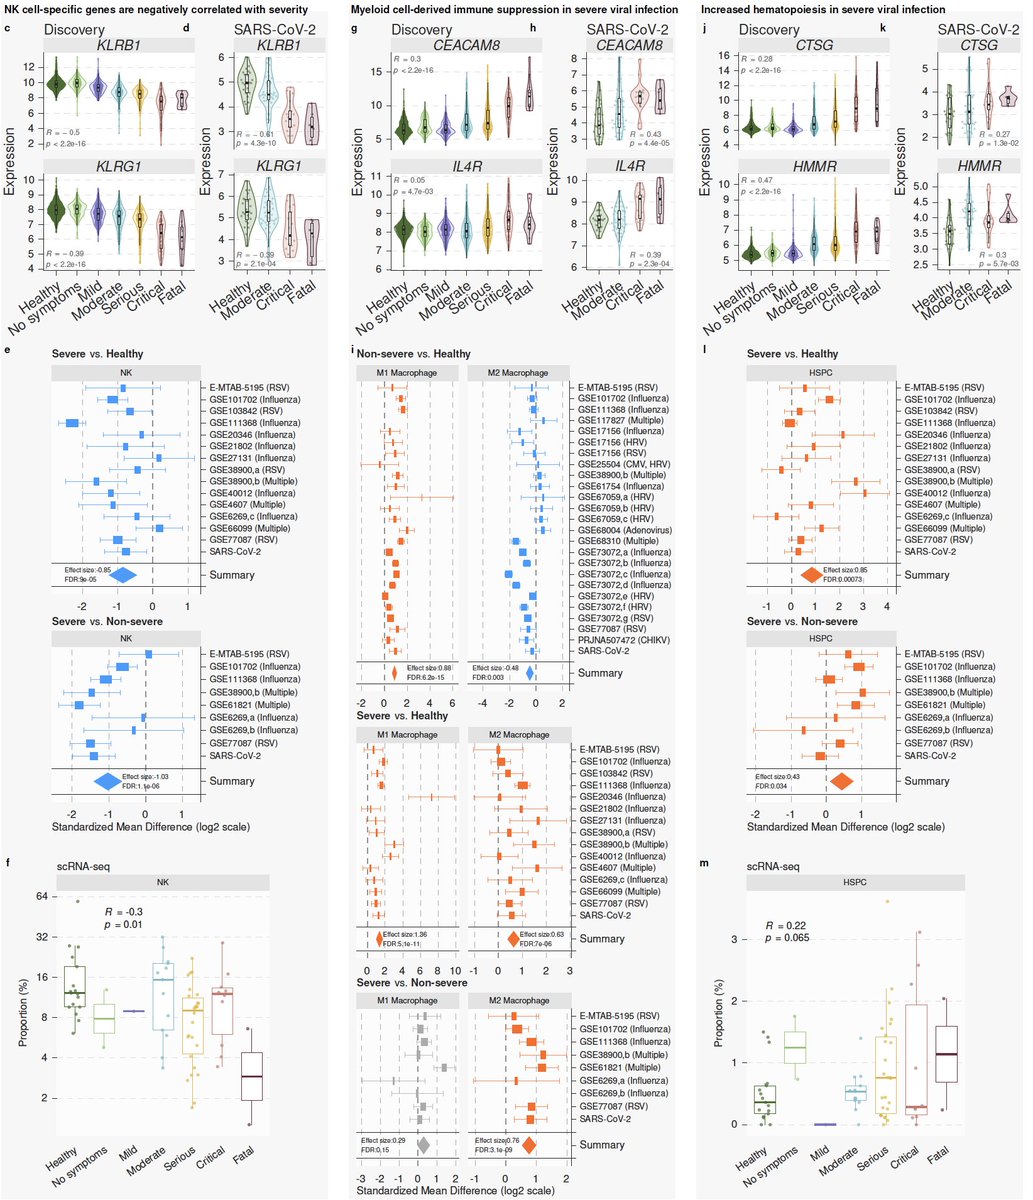 13/ We learned a lot from these 96 genes. They suggest increased hematopoietic progenitors and myeloid-derived suppressor cells, and decreased NK cells with increased severity of viral infection. We validate each of these using bulk and single-cell transcriptome profiles.